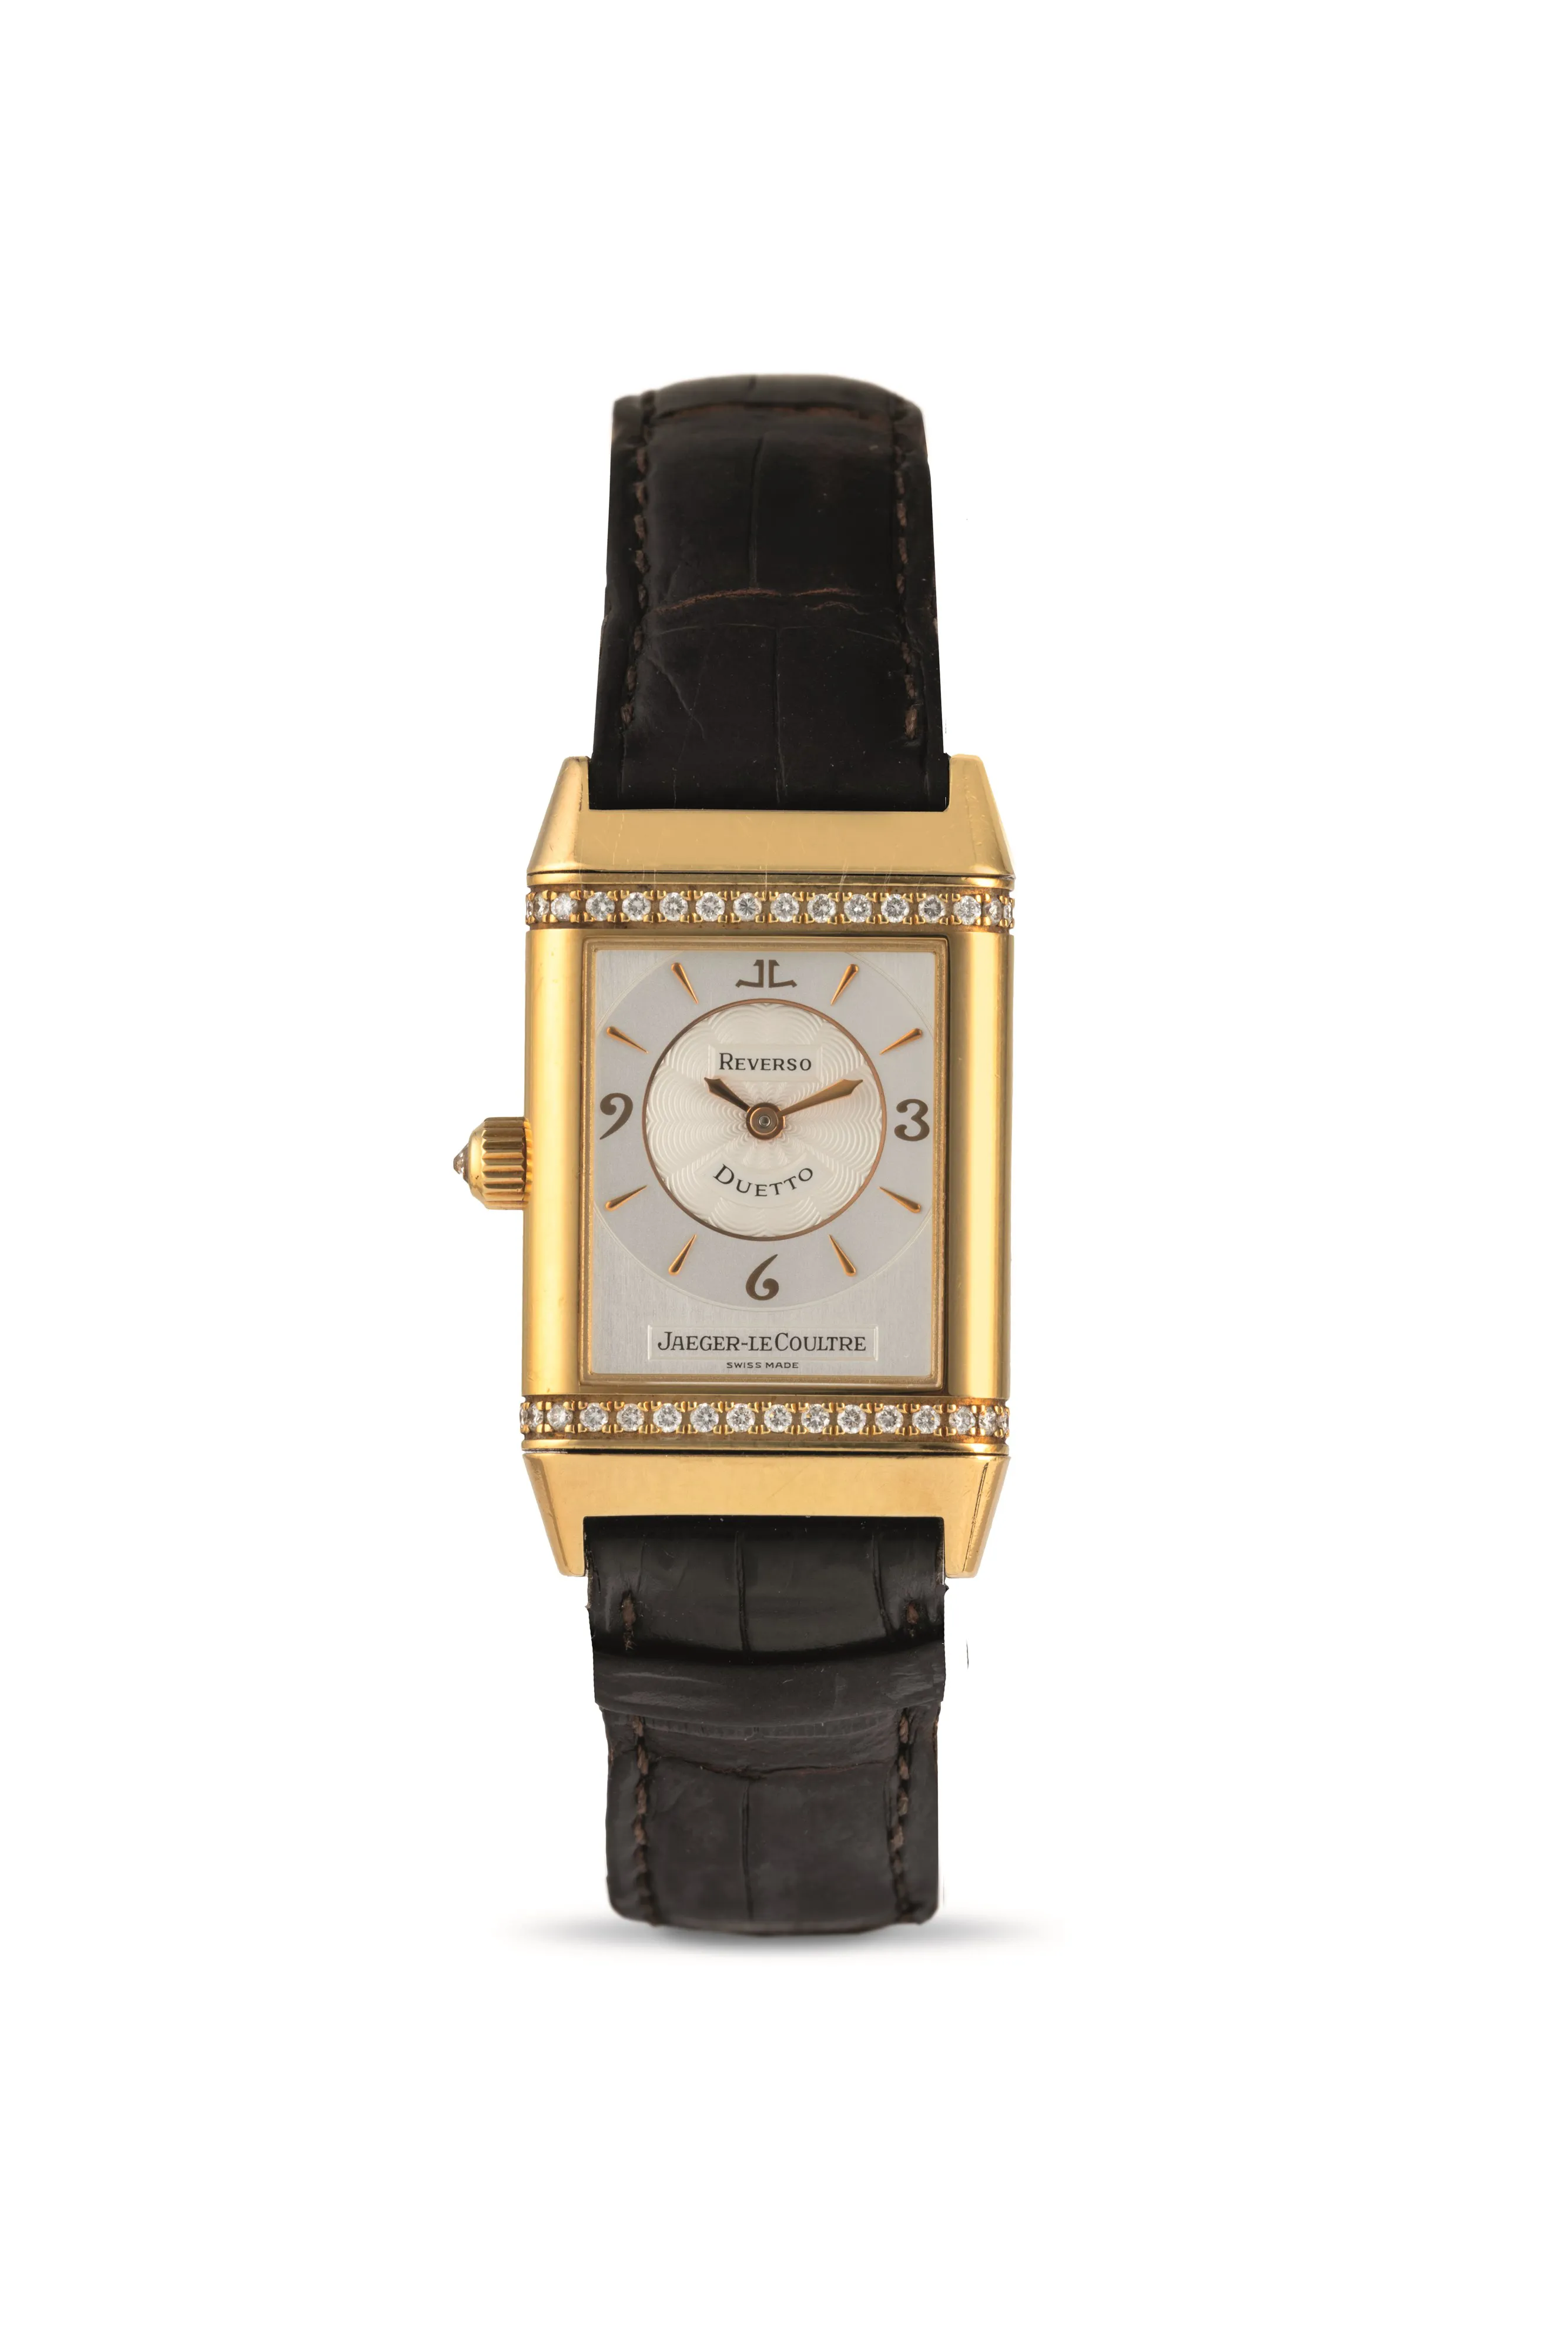 Jaeger-LeCoultre Reverso Duetto Classique 256.1.75 23mm Yellow gold and diamond-set Silver